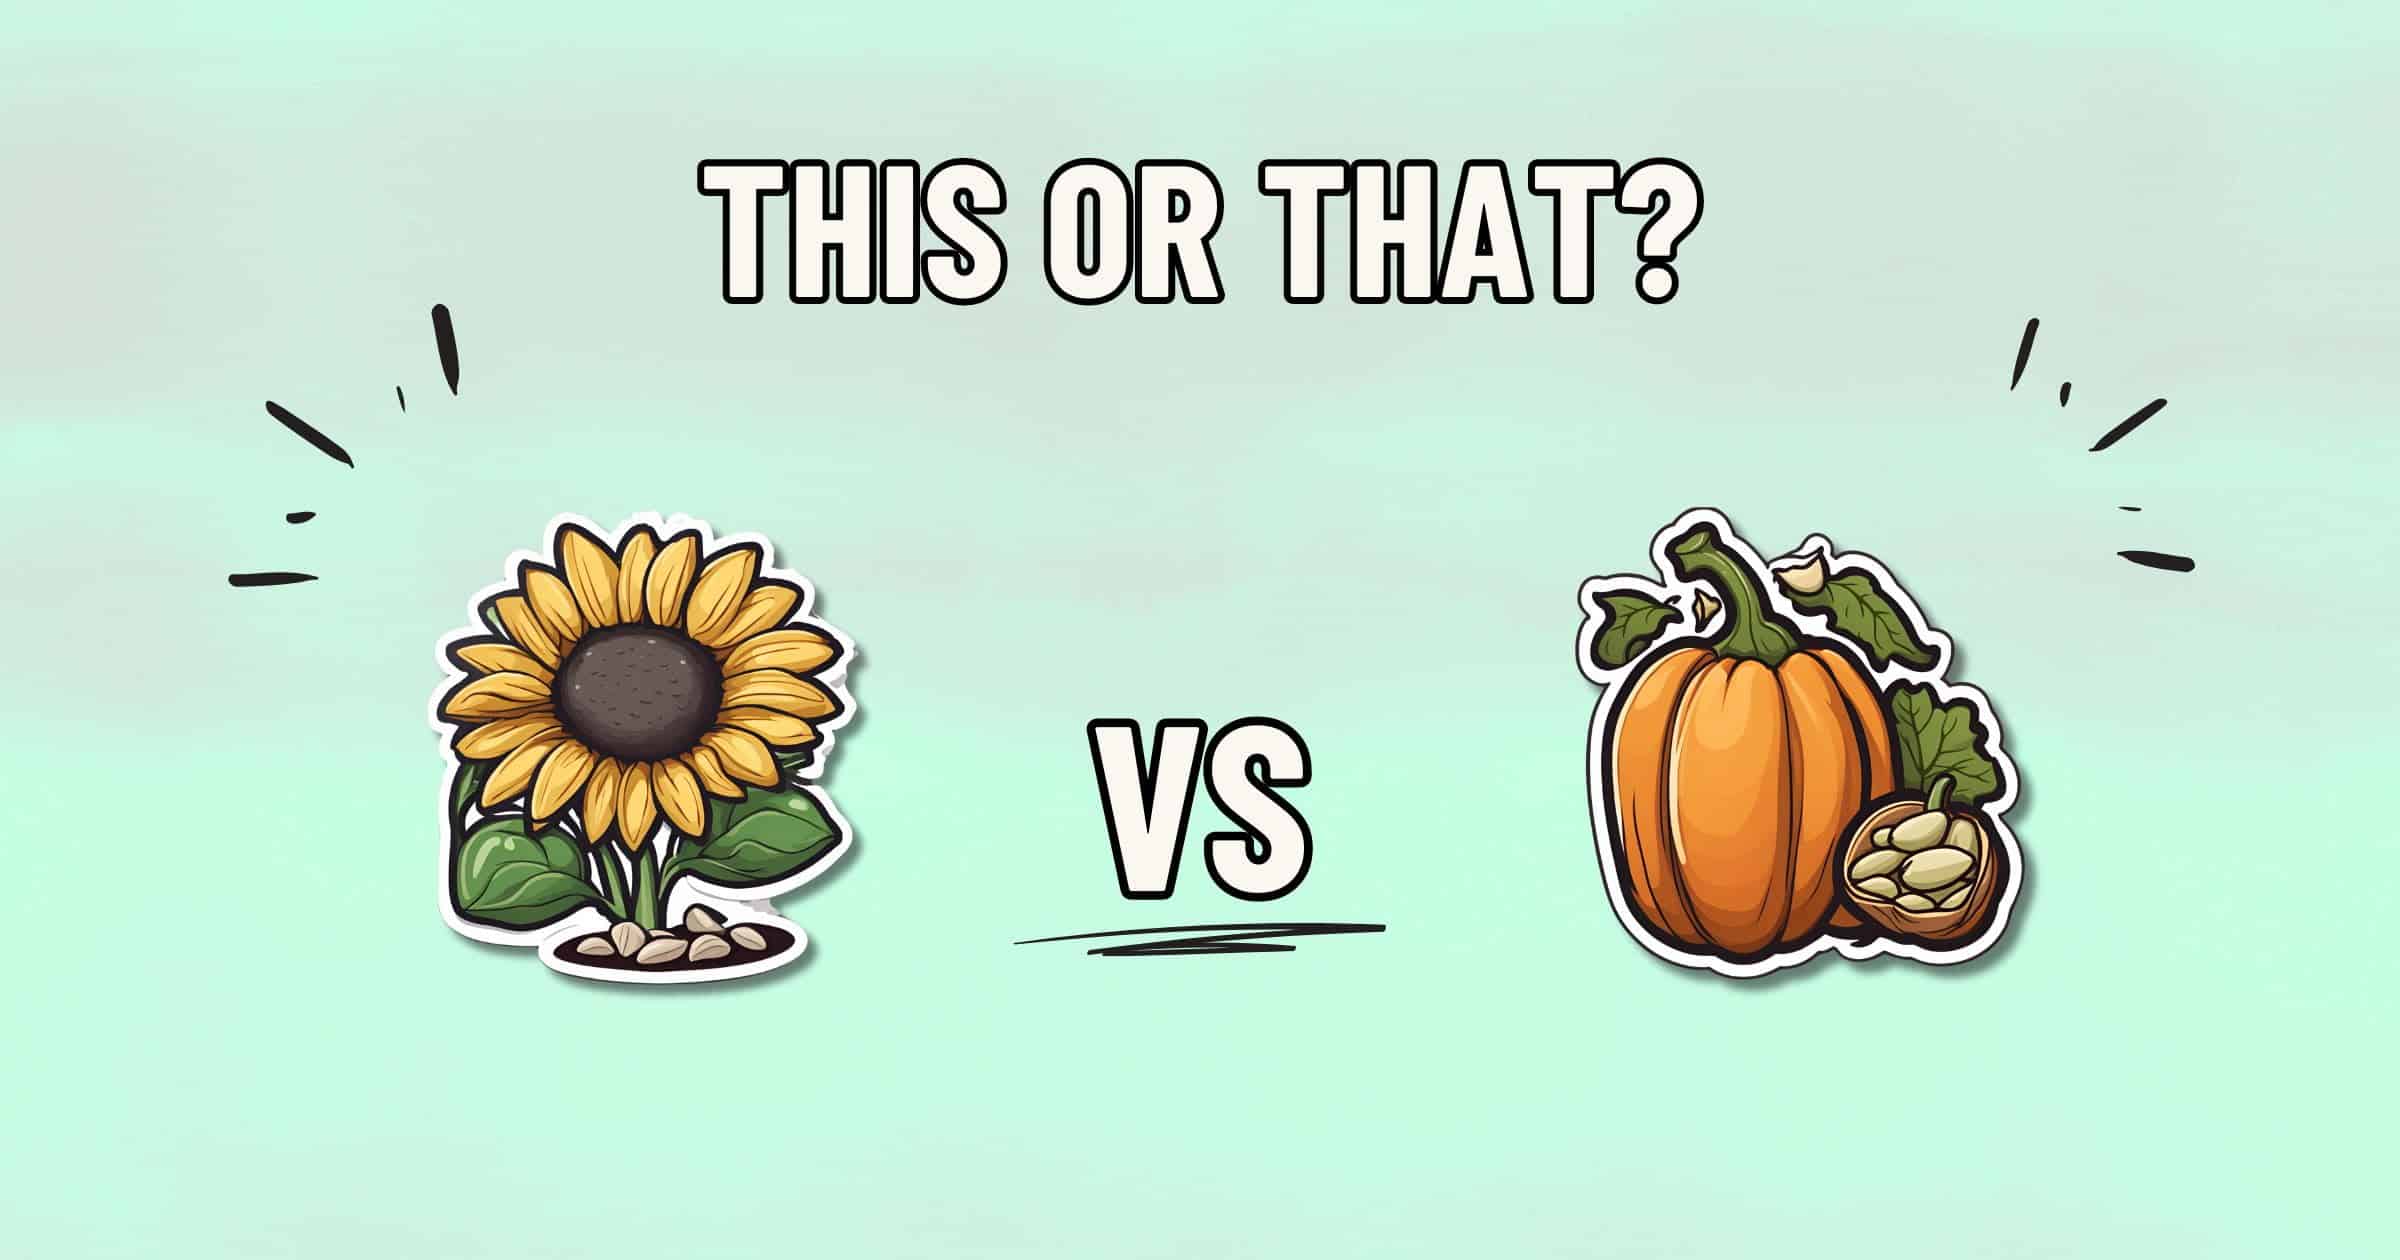         An illustration with text asking "This or That?" at the top. Below, a choice is depicted: a sunflower on the left and a pumpkin on the right, each representing their seeds. A "VS" separates them in the middle, prompting viewers to consider which seeds are healthier. The background is a light green gradient.